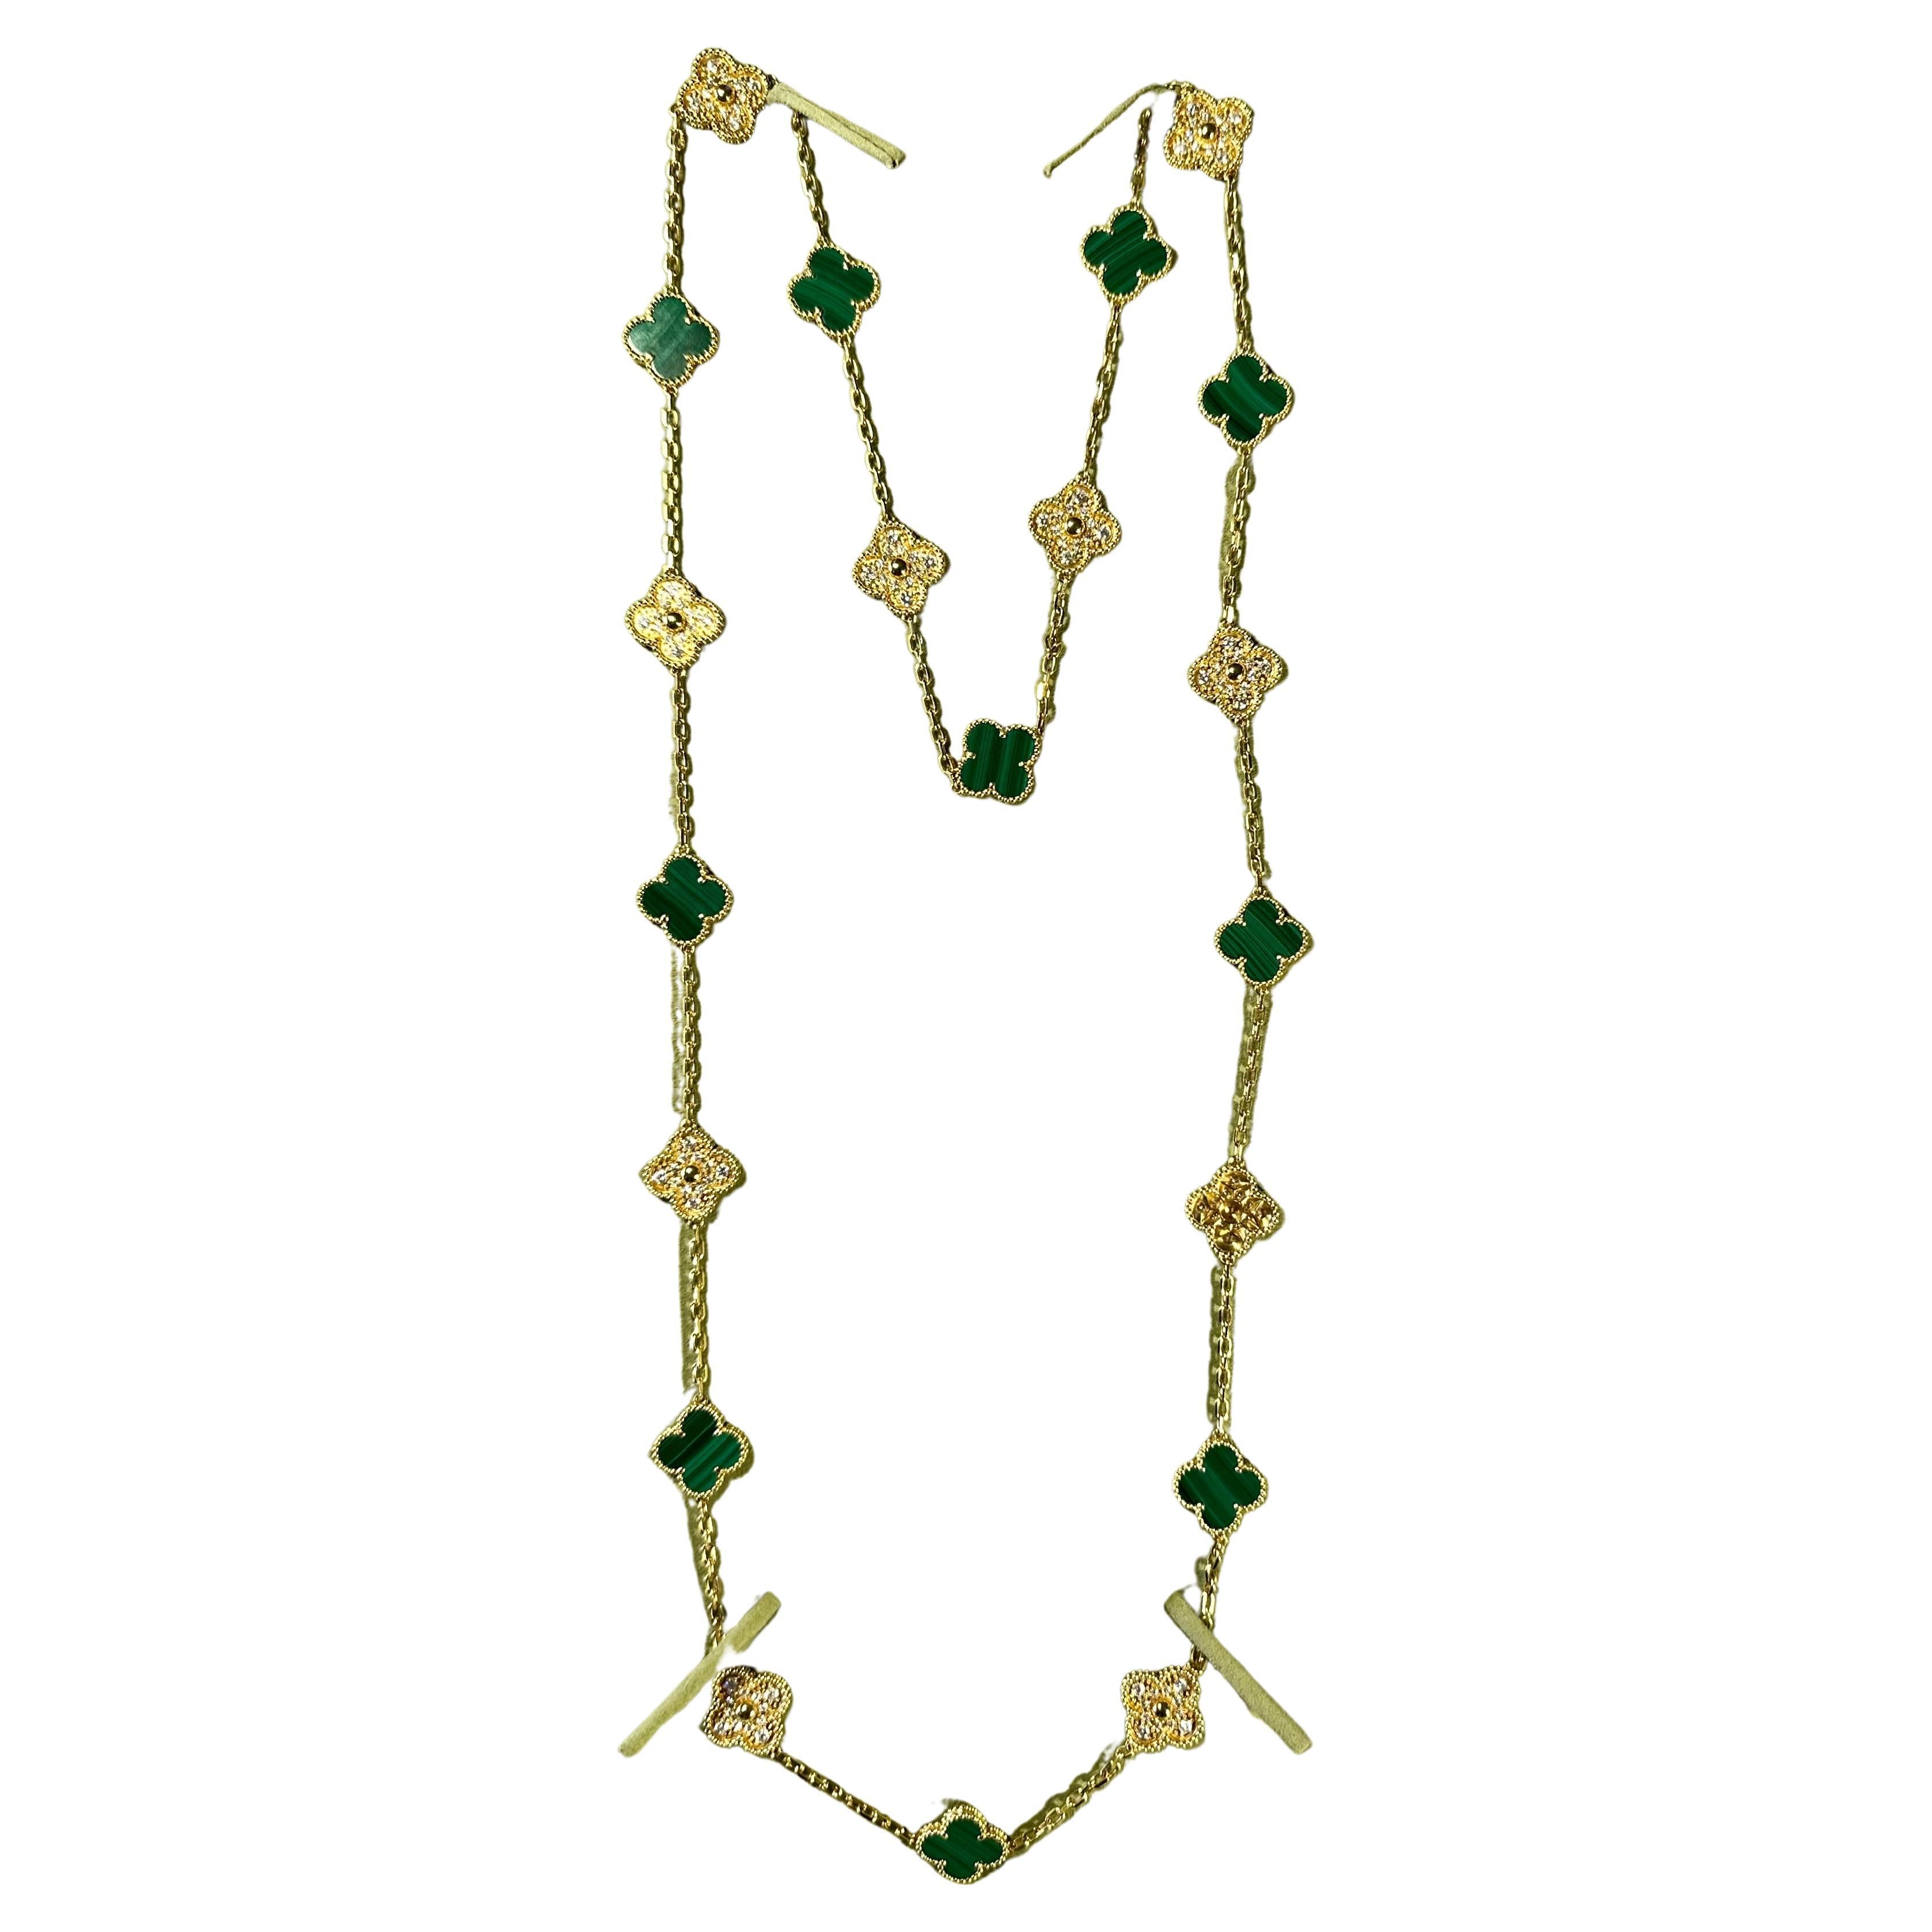 This classic vintage Van Cleef & Arpels necklace is crafted in 18k yellow gold and features 20 lucky clover motifs inlaid with green malachite in round bead settings. Made in France. 
Excellent condition. Certificate 2018
Comes with original case